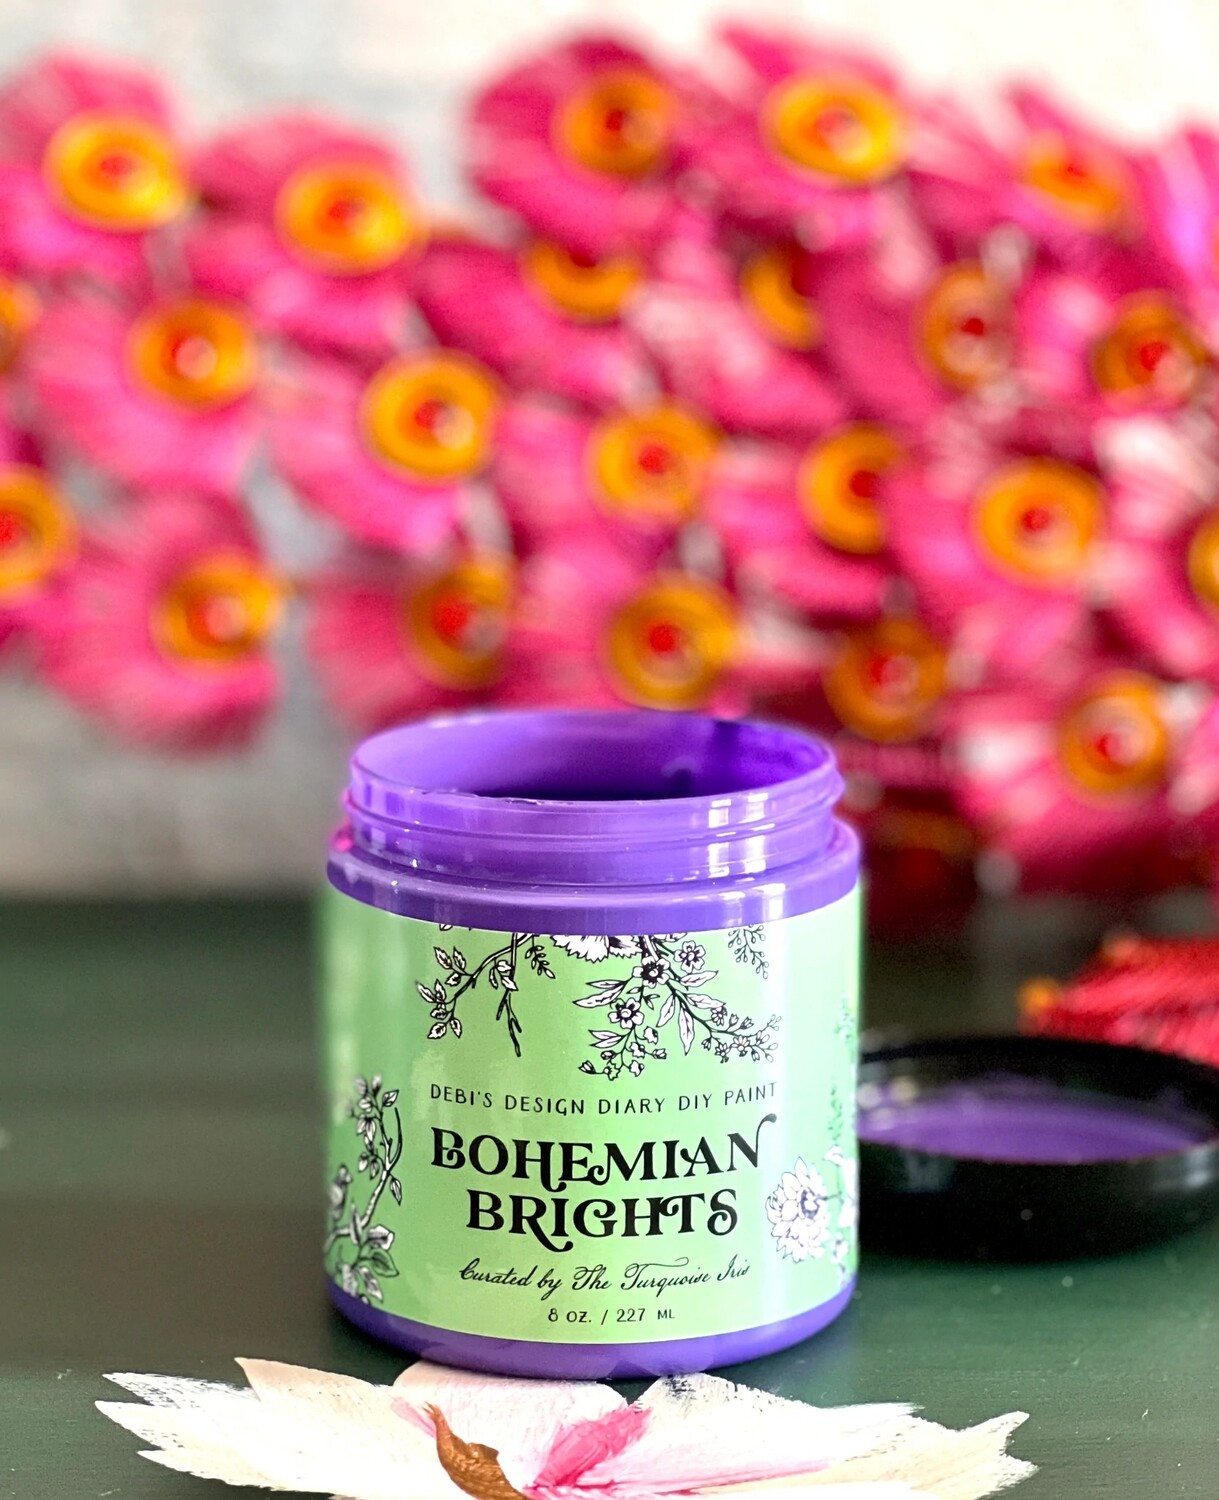 Flourished | Bohemian Brights by DIY Paint